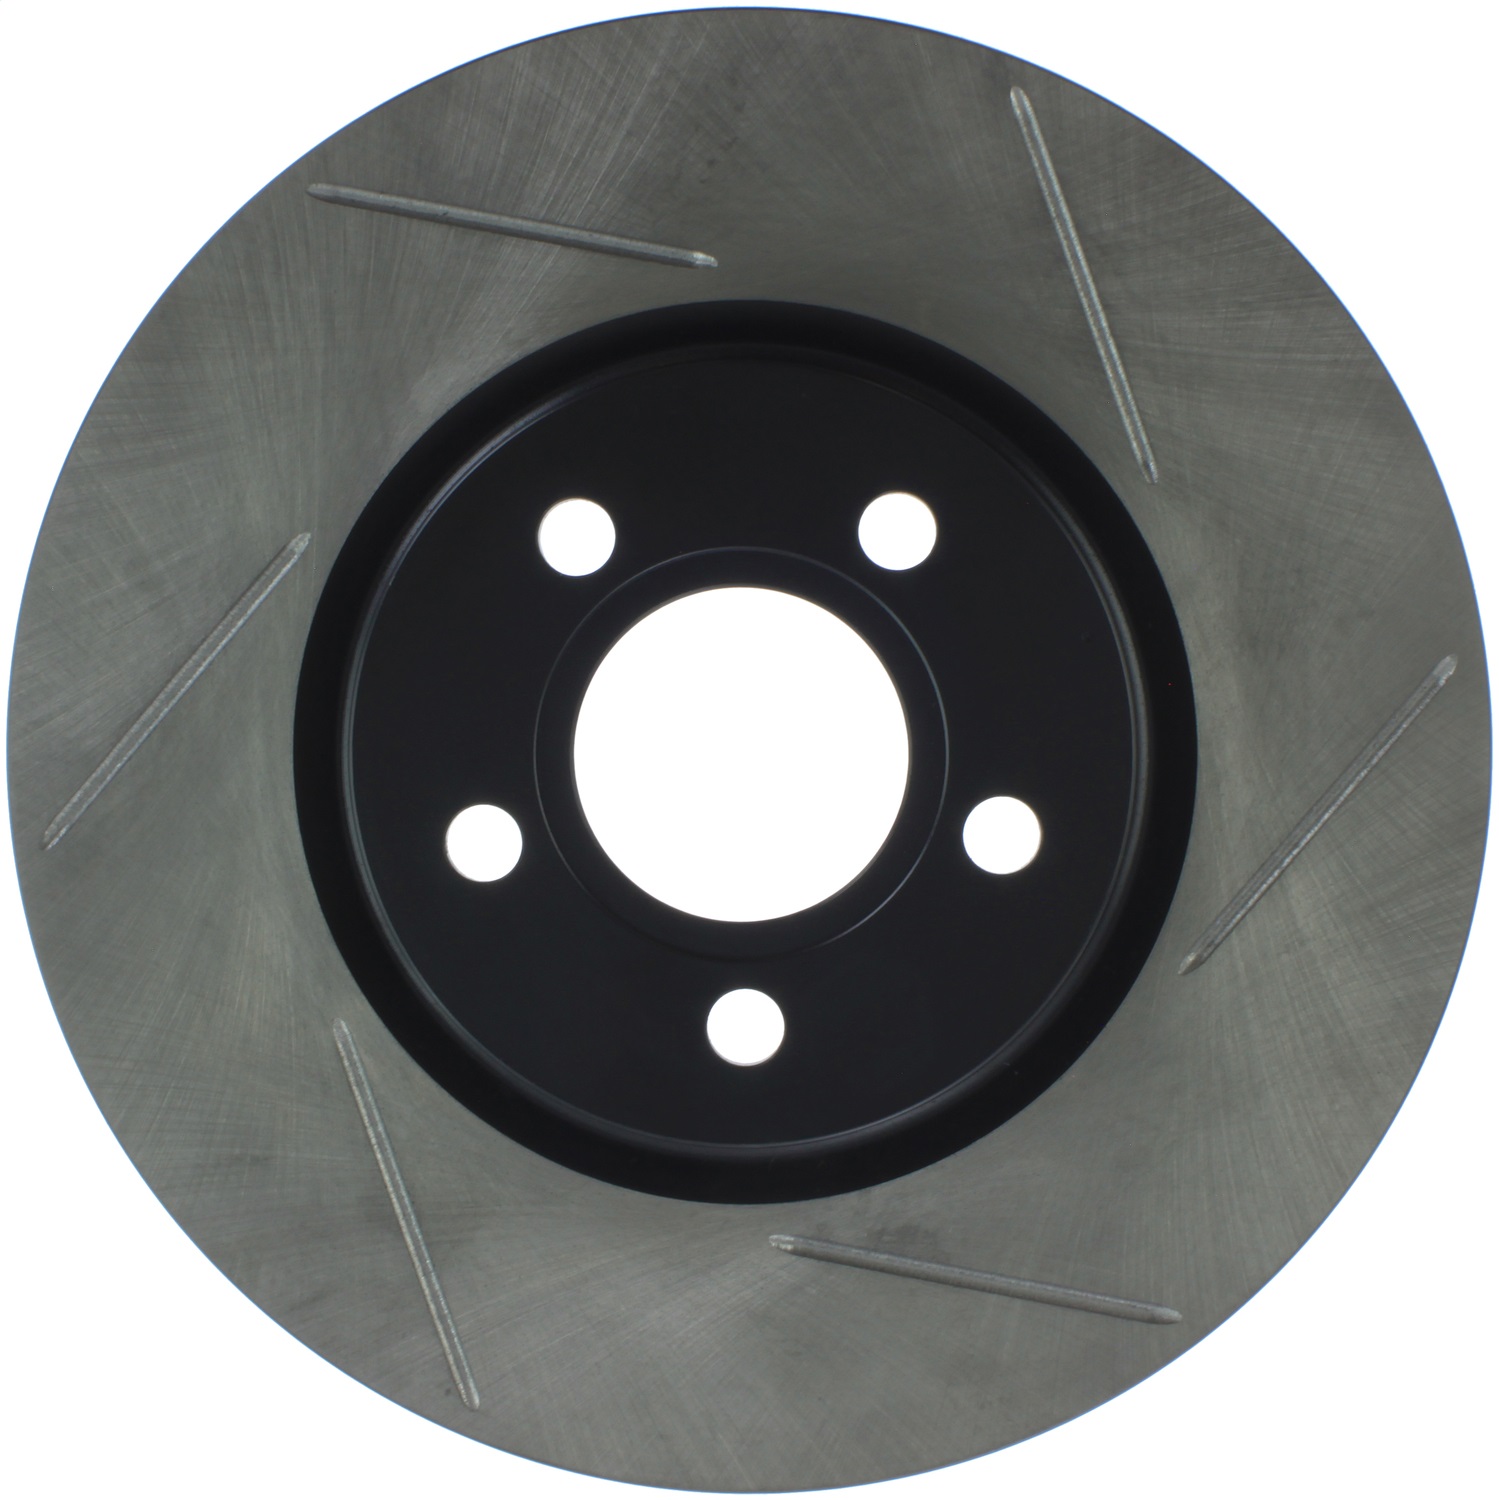 StopTech 126.63053SL Sport Slotted Disc Brake Rotor Fits 03-09 Neon PT Cruiser